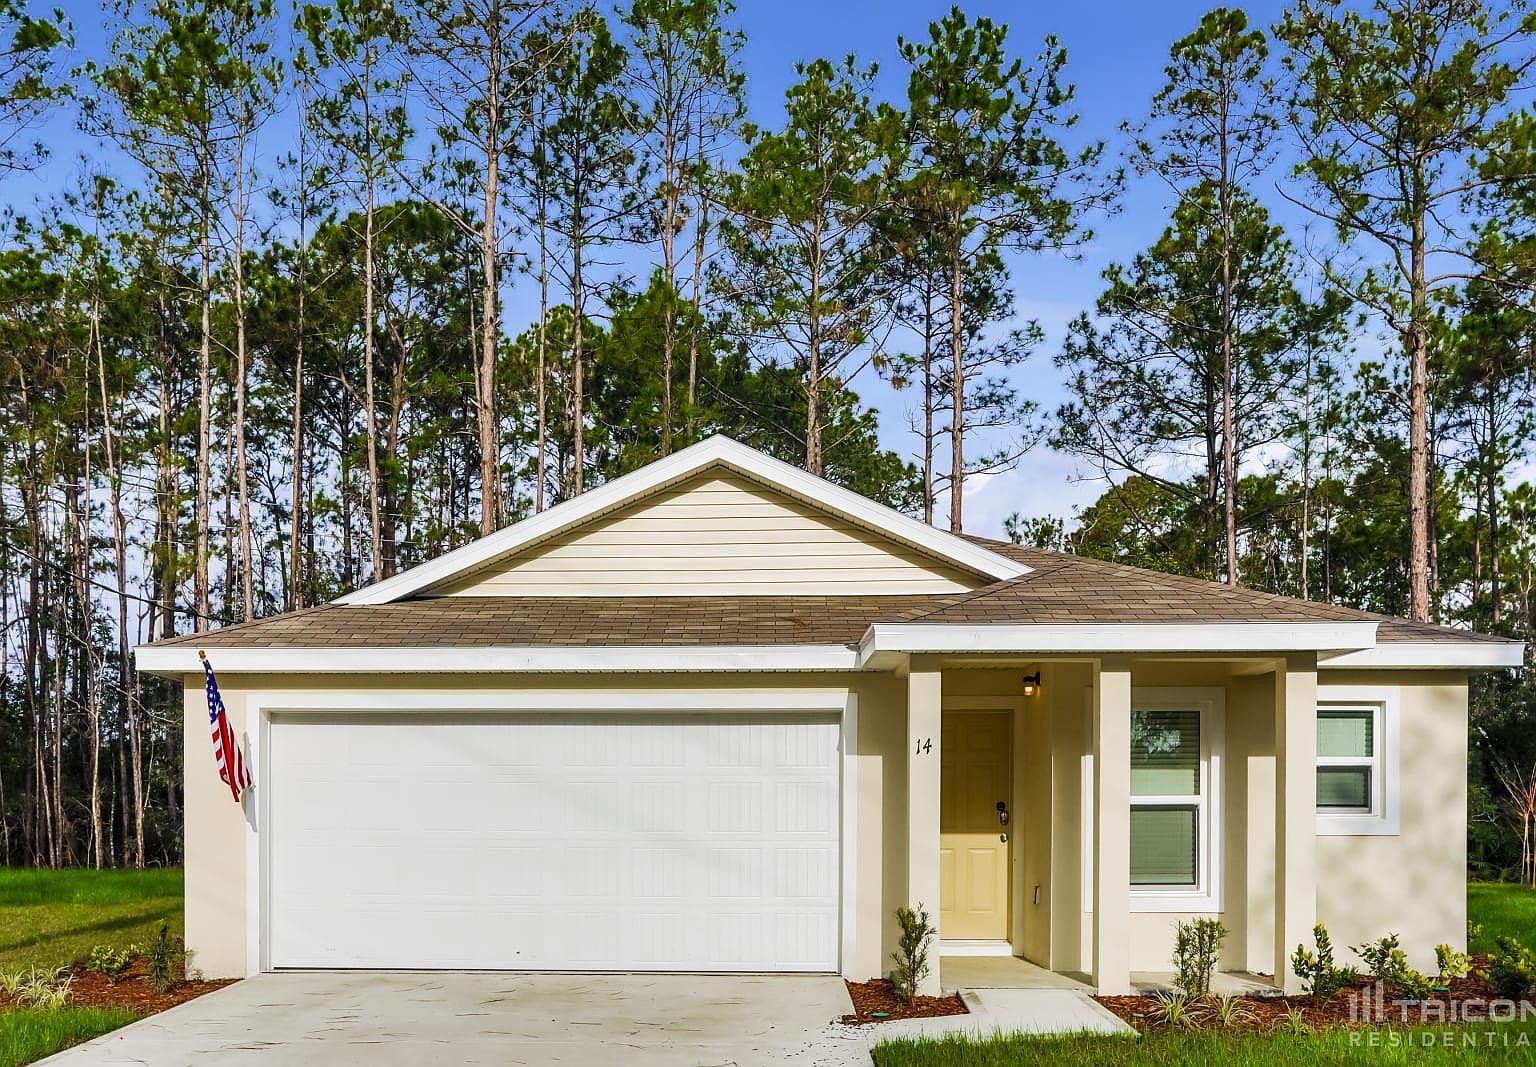 14 Rolling Pl Palm Coast Fl 32164 Zillow Find palm coast, fl rentals, apartments & homes for rent with coldwell banker realty. 14 rolling pl palm coast fl 32164 zillow